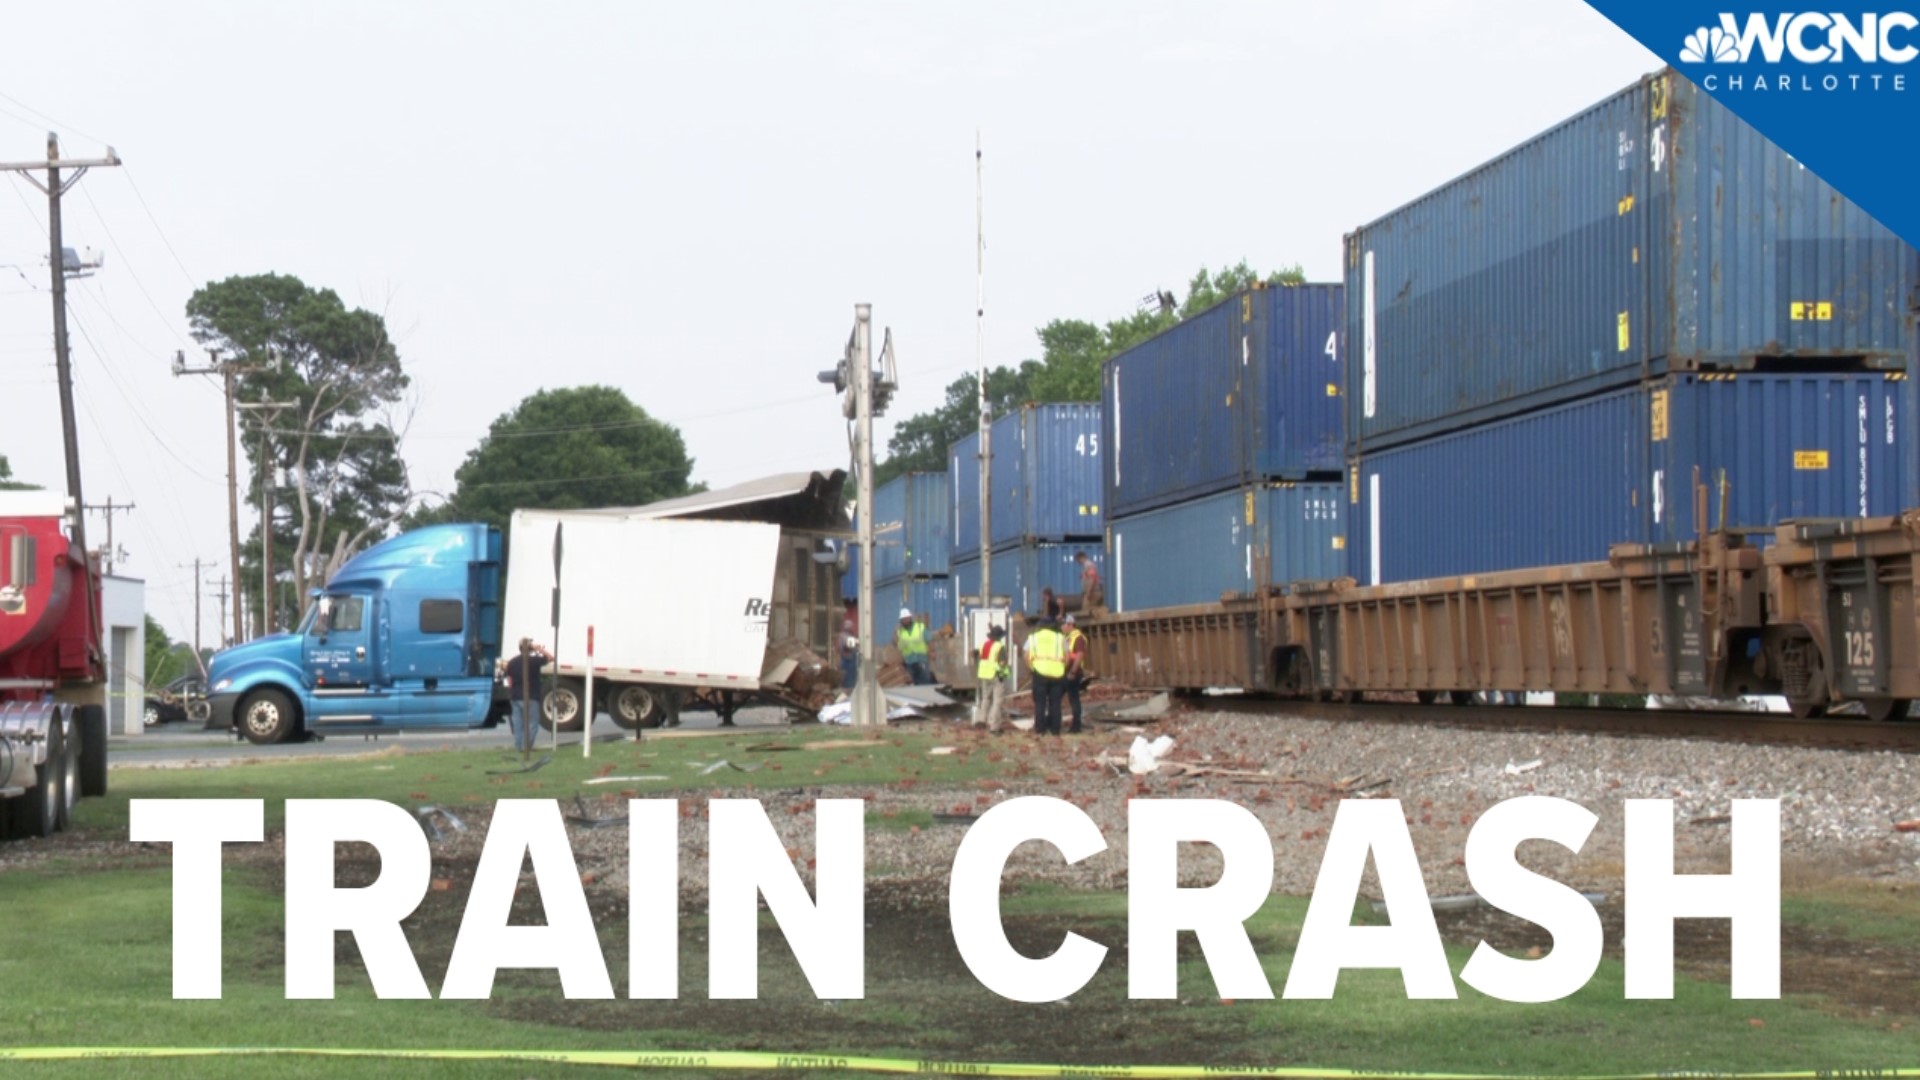 A tractor-trailer was struck by a train after getting stuck on the tracks on Thursday.